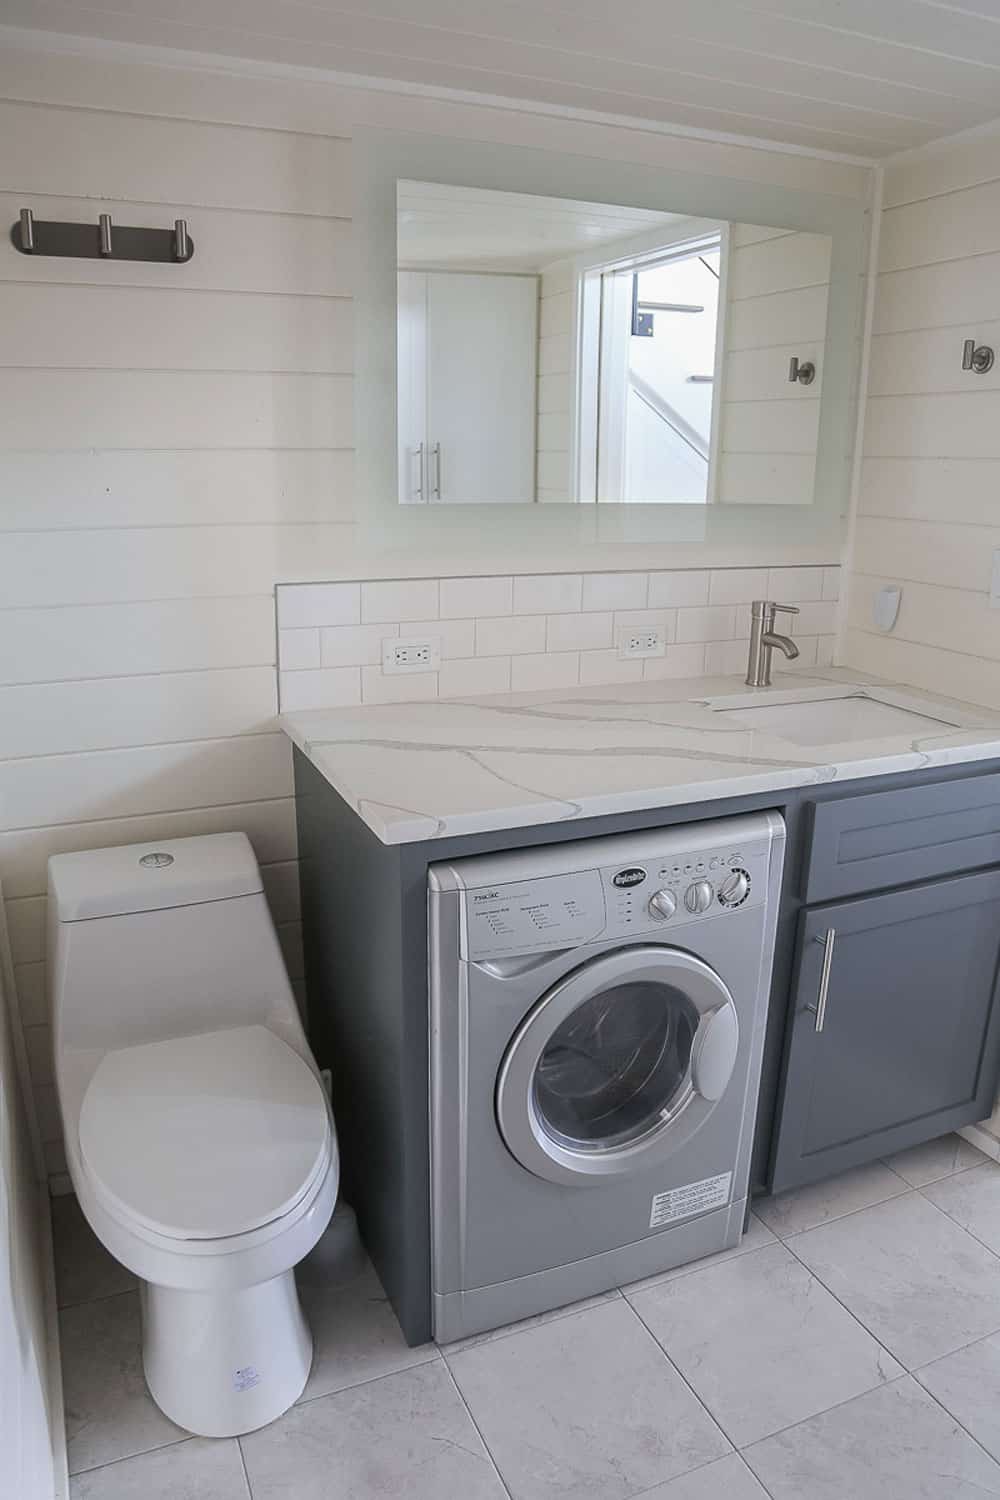 Bathroom / washer combo in the Contempo custom tiny home